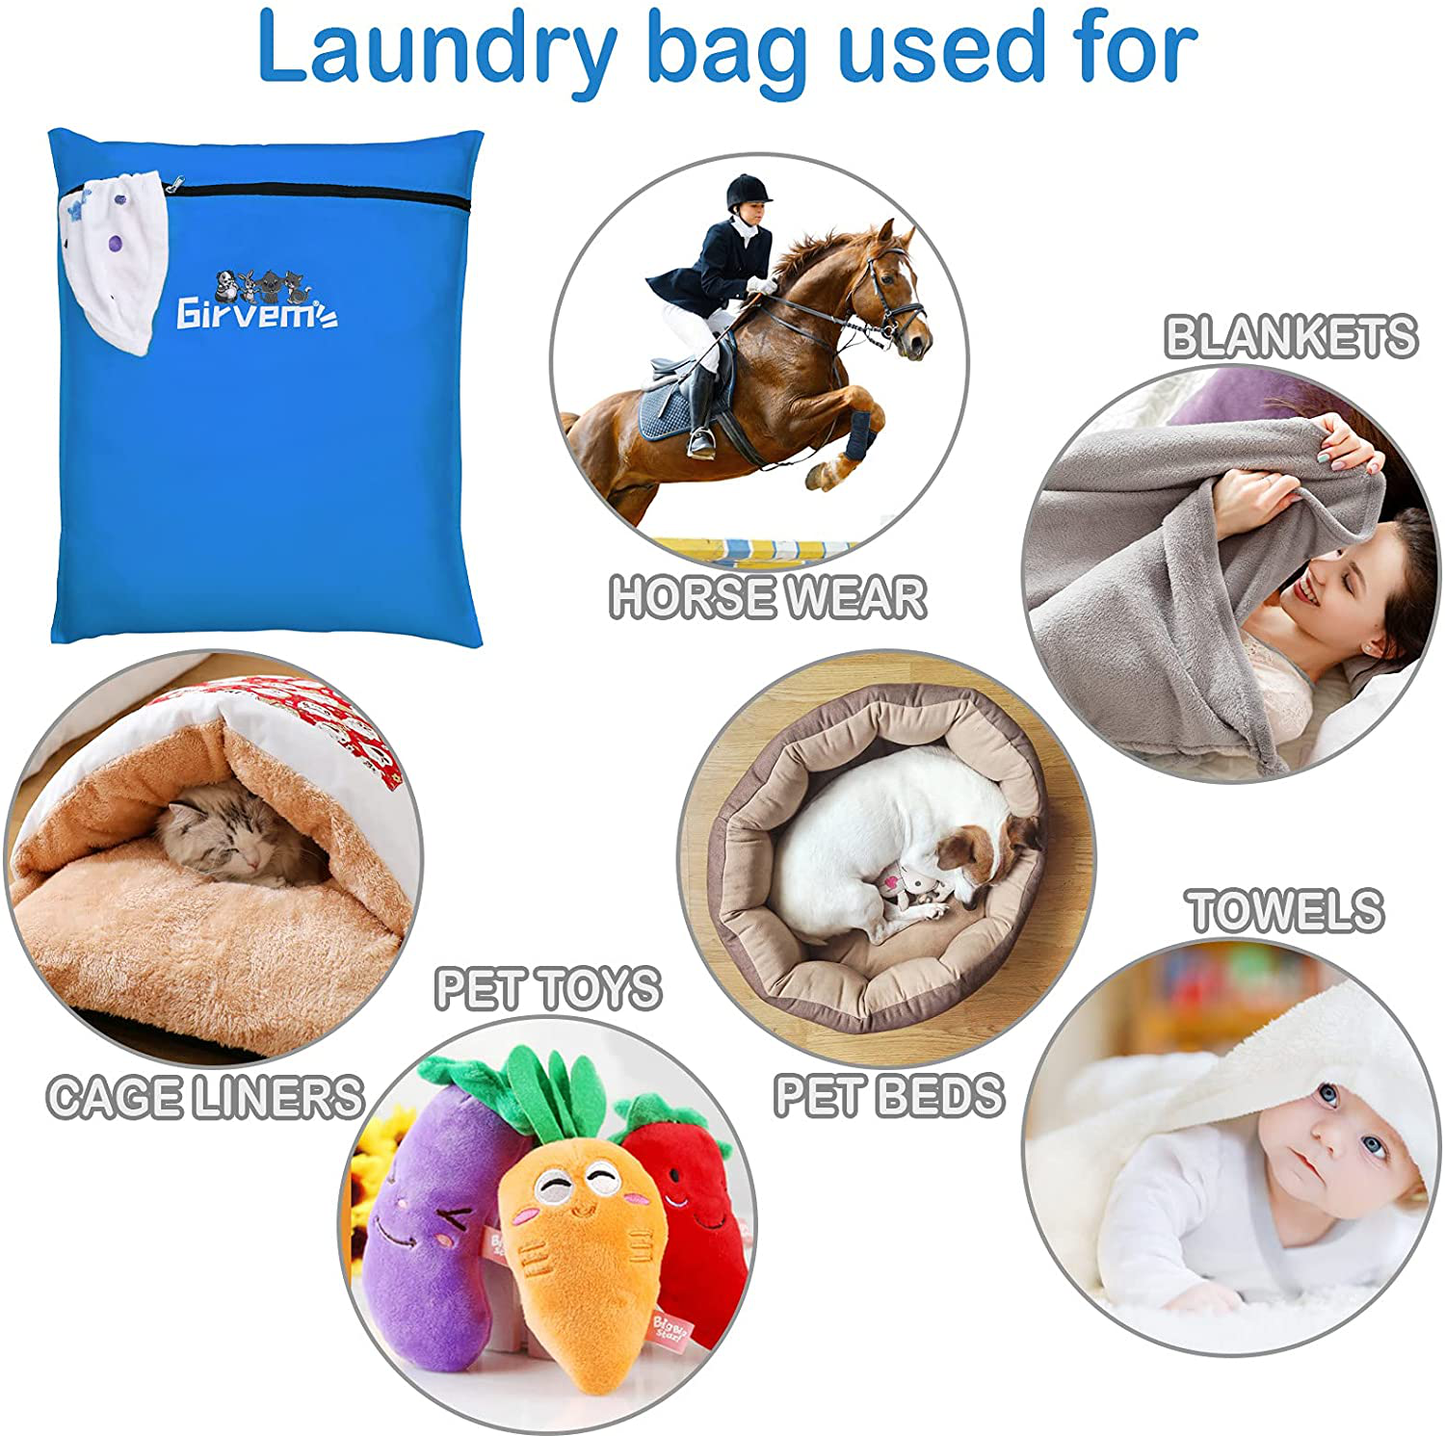 Pet Laundry Bag to Stops Pet Hair Blocking the Washing Machine Pet Laundry Helper for Guinea Pigs, Rabbits, Small Animal Fleece Bedding, Midwest Cage Liners, C&C Cage Liners, and More, Blue Animals & Pet Supplies > Pet Supplies > Small Animal Supplies > Small Animal Bedding GIRVEM   